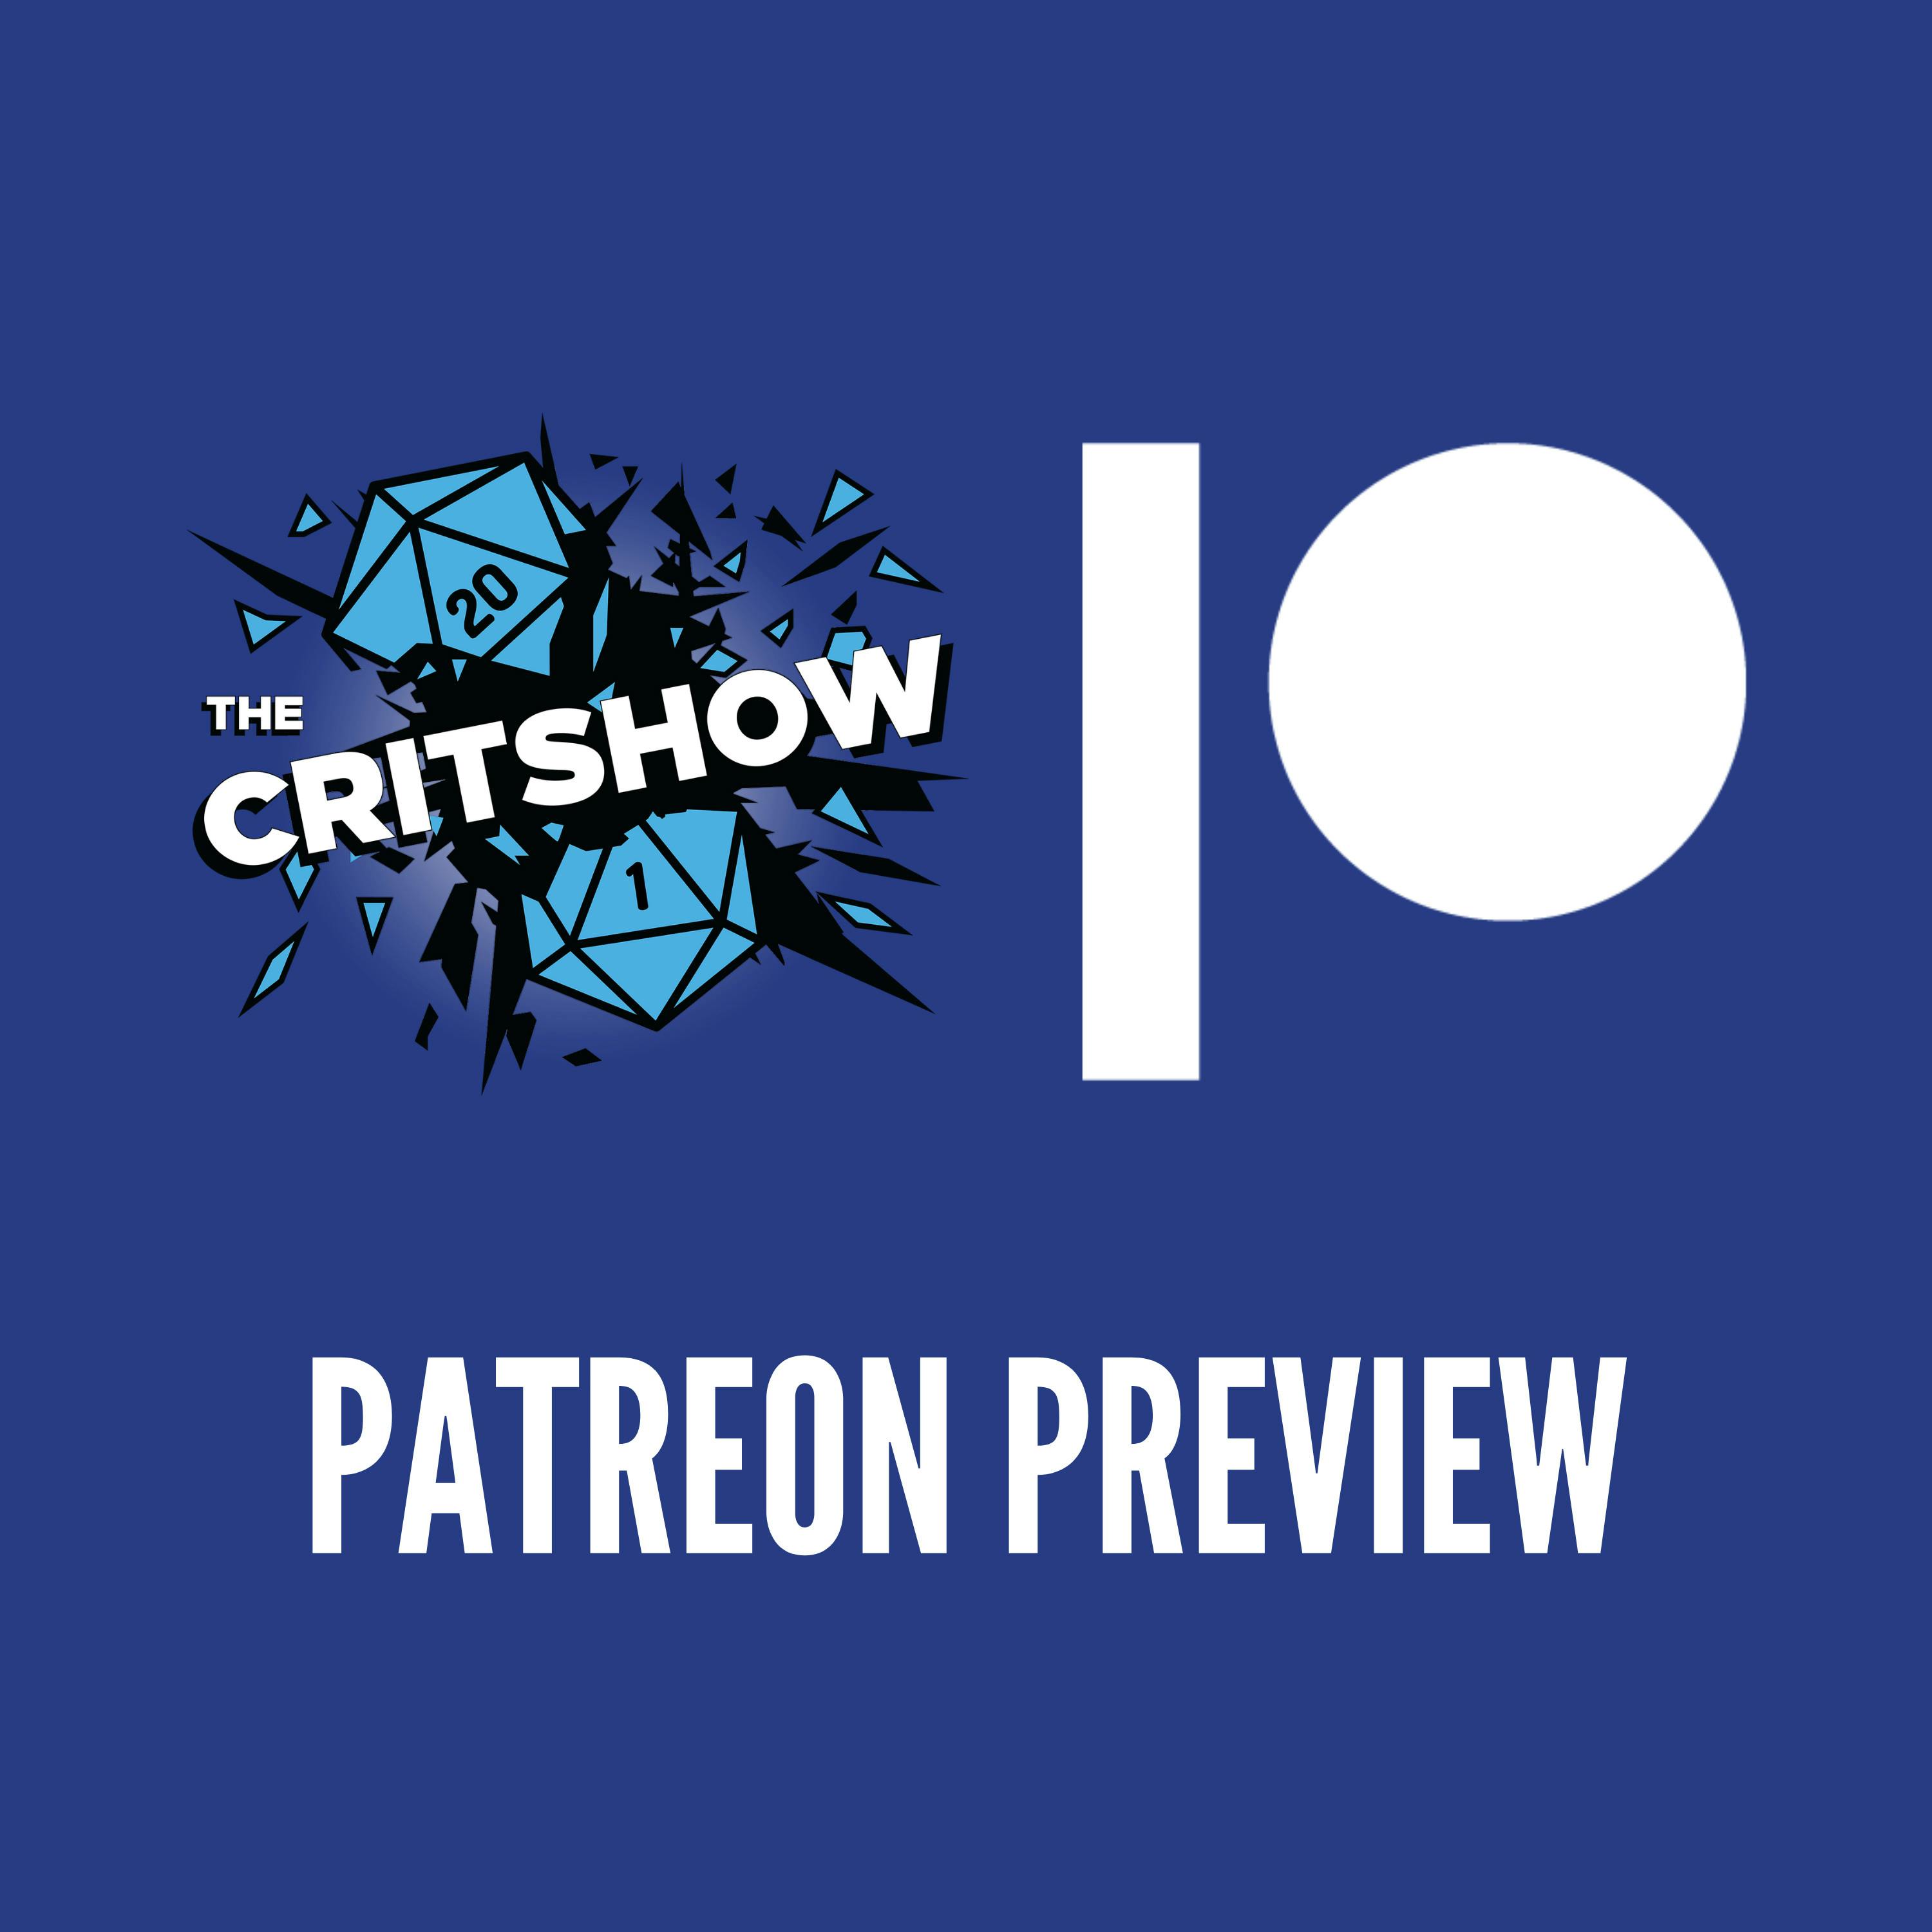 The Critshow: Patreon Preview